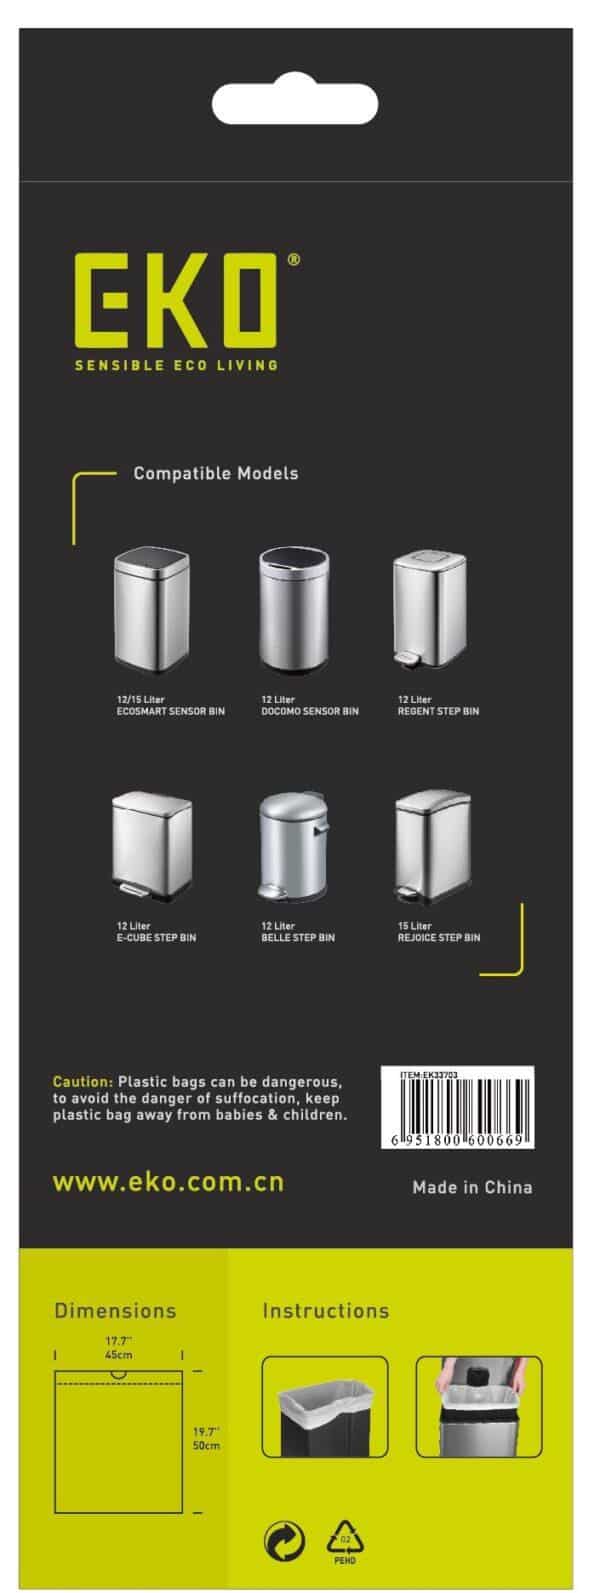 Package of Eko stainless steel drawers with Size C Bin Liners 10-15L, 20 bags.